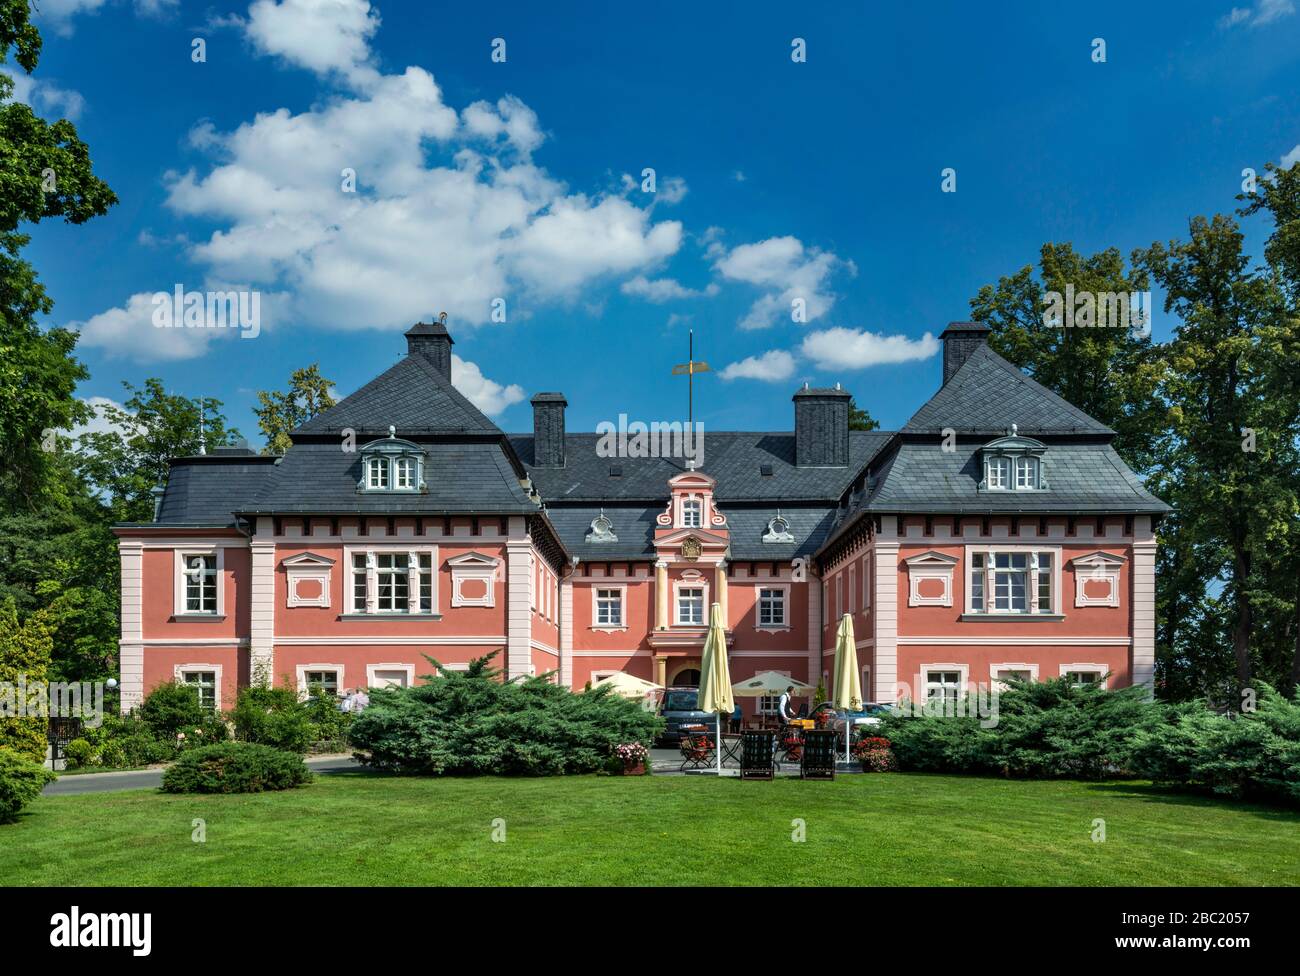 Milkow Palace, 17th century, rebuilt in 1768, hotel in Milkow, Jelenia Gora Valley Culture Park (Valley of Palaces), Lower Silesia, Poland Stock Photo